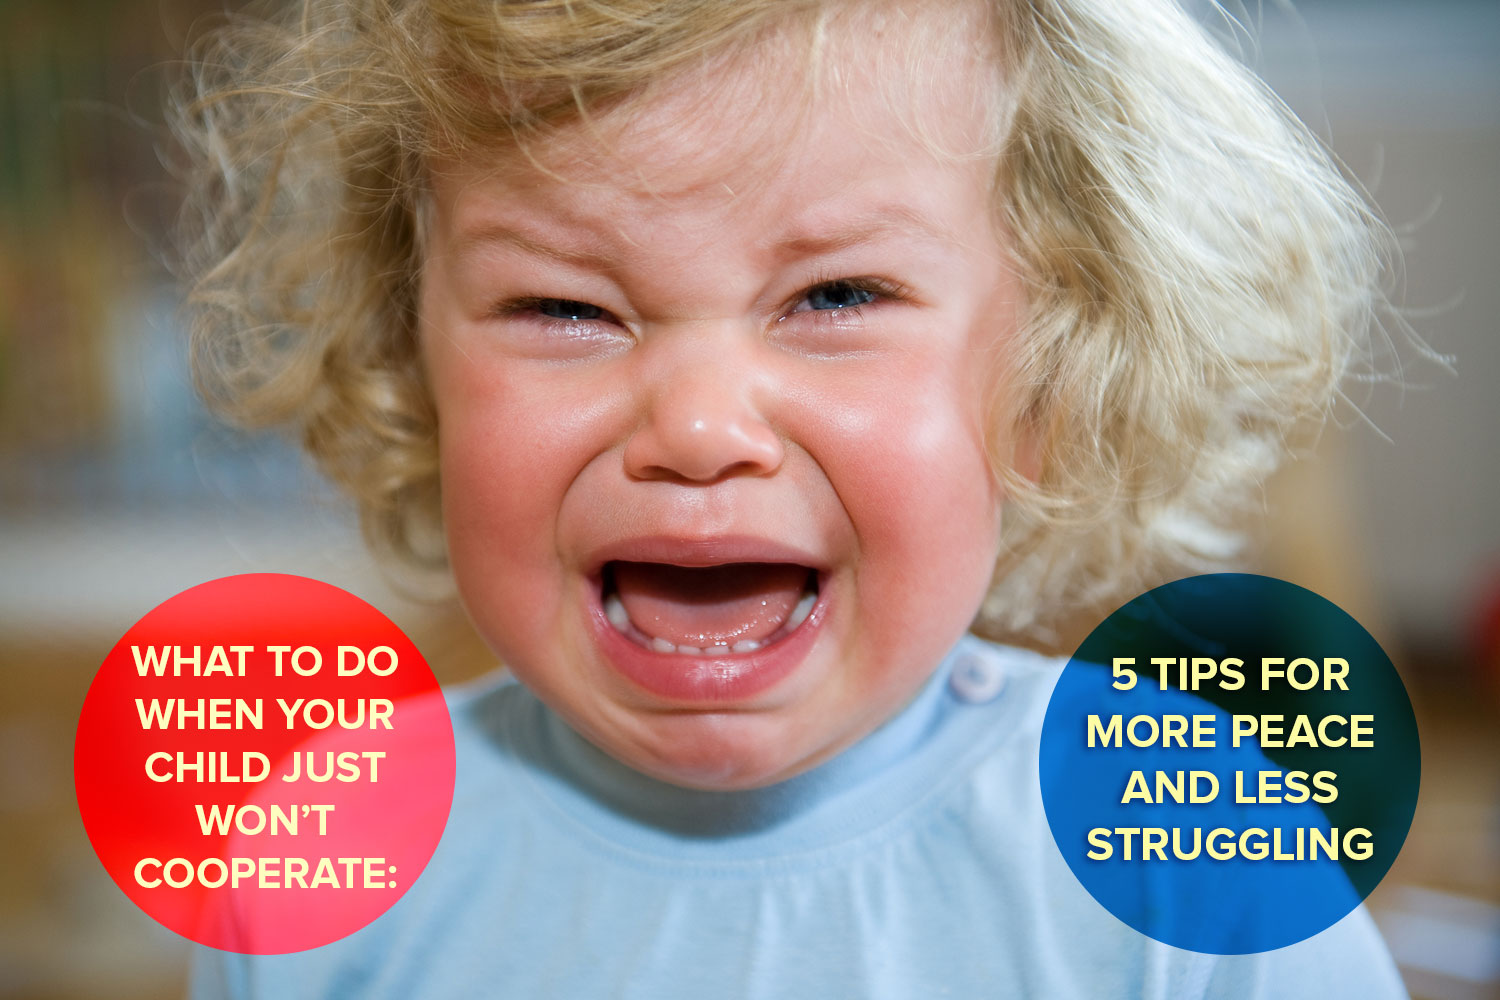 What to do when your child just won’t cooperate: 5 tips for more peace and less struggling